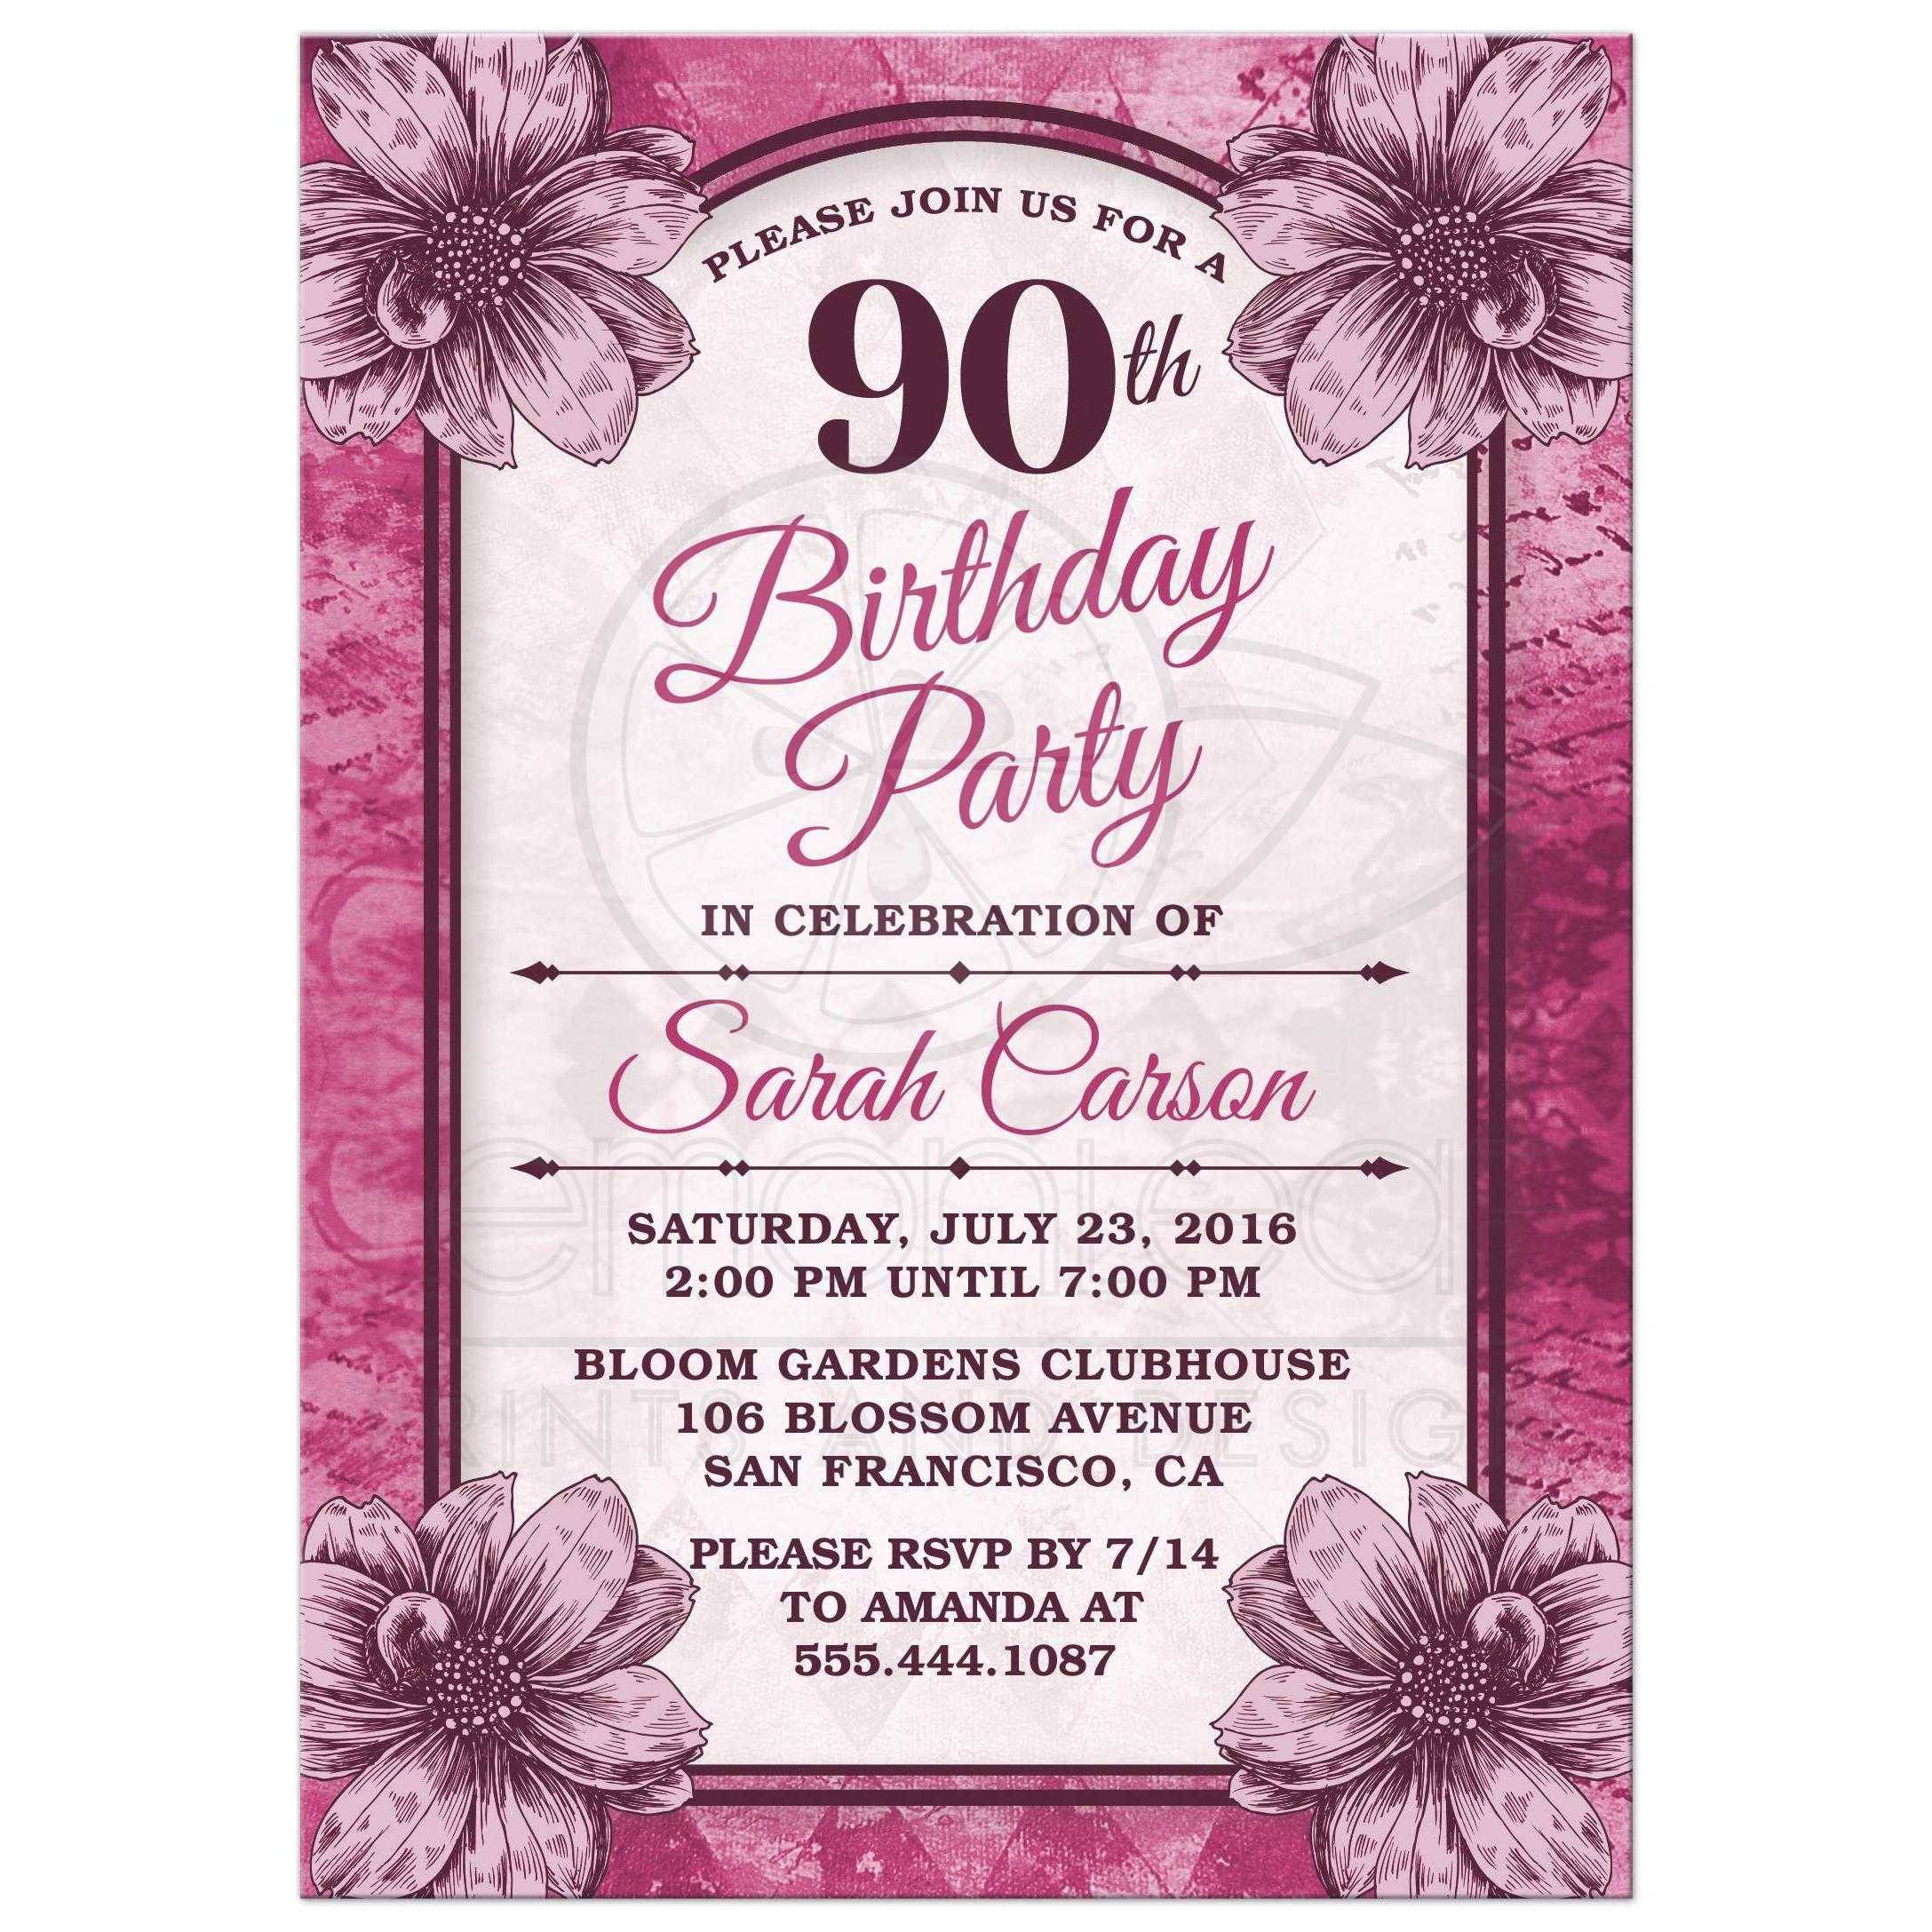 90th Birthday Party Invitations Templates Free Party Ideas In 2019 within proportions 2175 X 2175